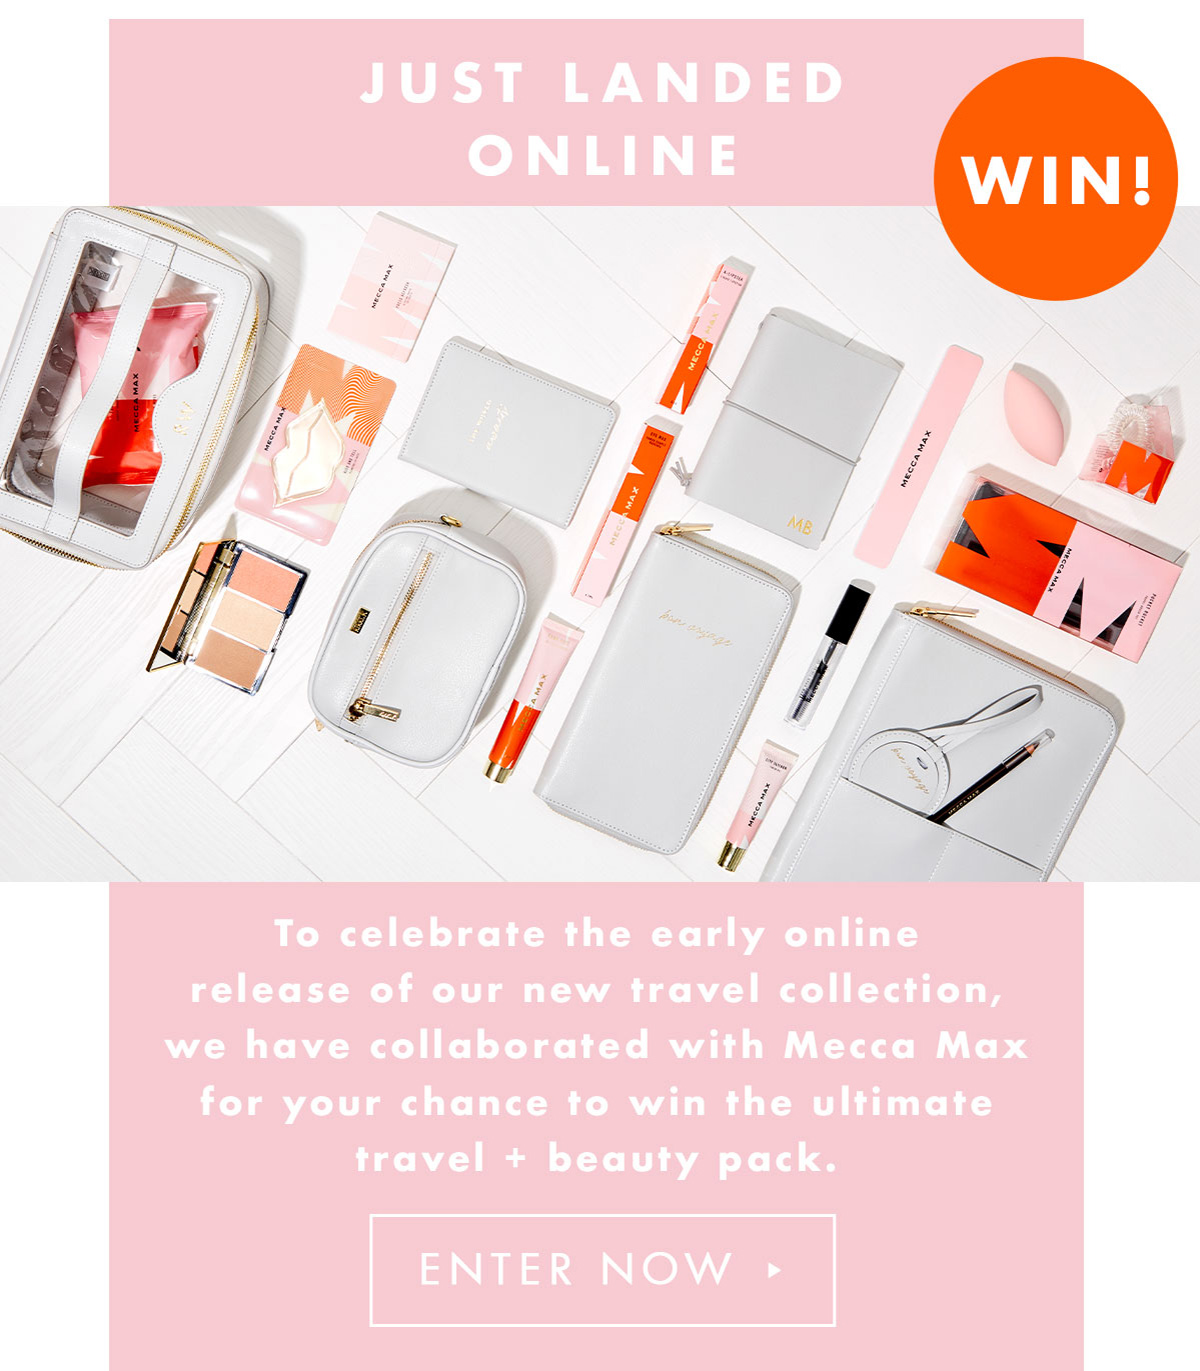 Win! To celebrate the early release of our new Travel Collection we have partnered with Mecca Max for your chance to win the ultimate travel and beauty pack! Enter now. 